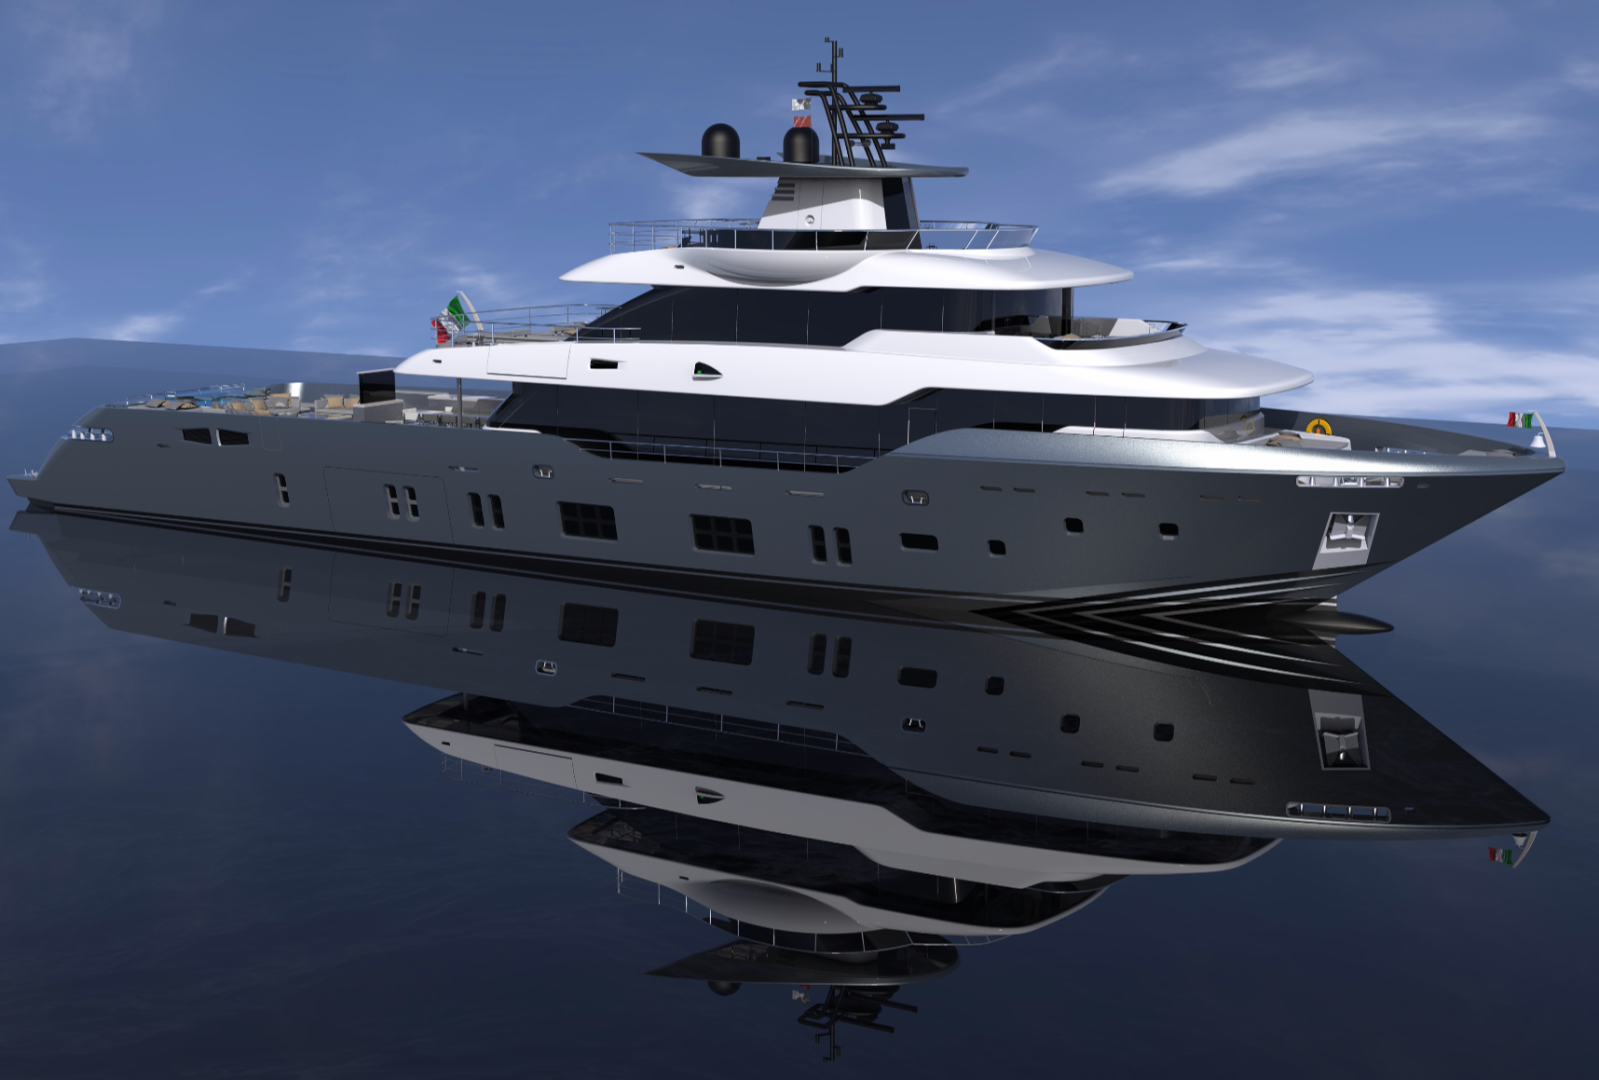 Oceanic Yachts 140’ fast expedition construction well underway